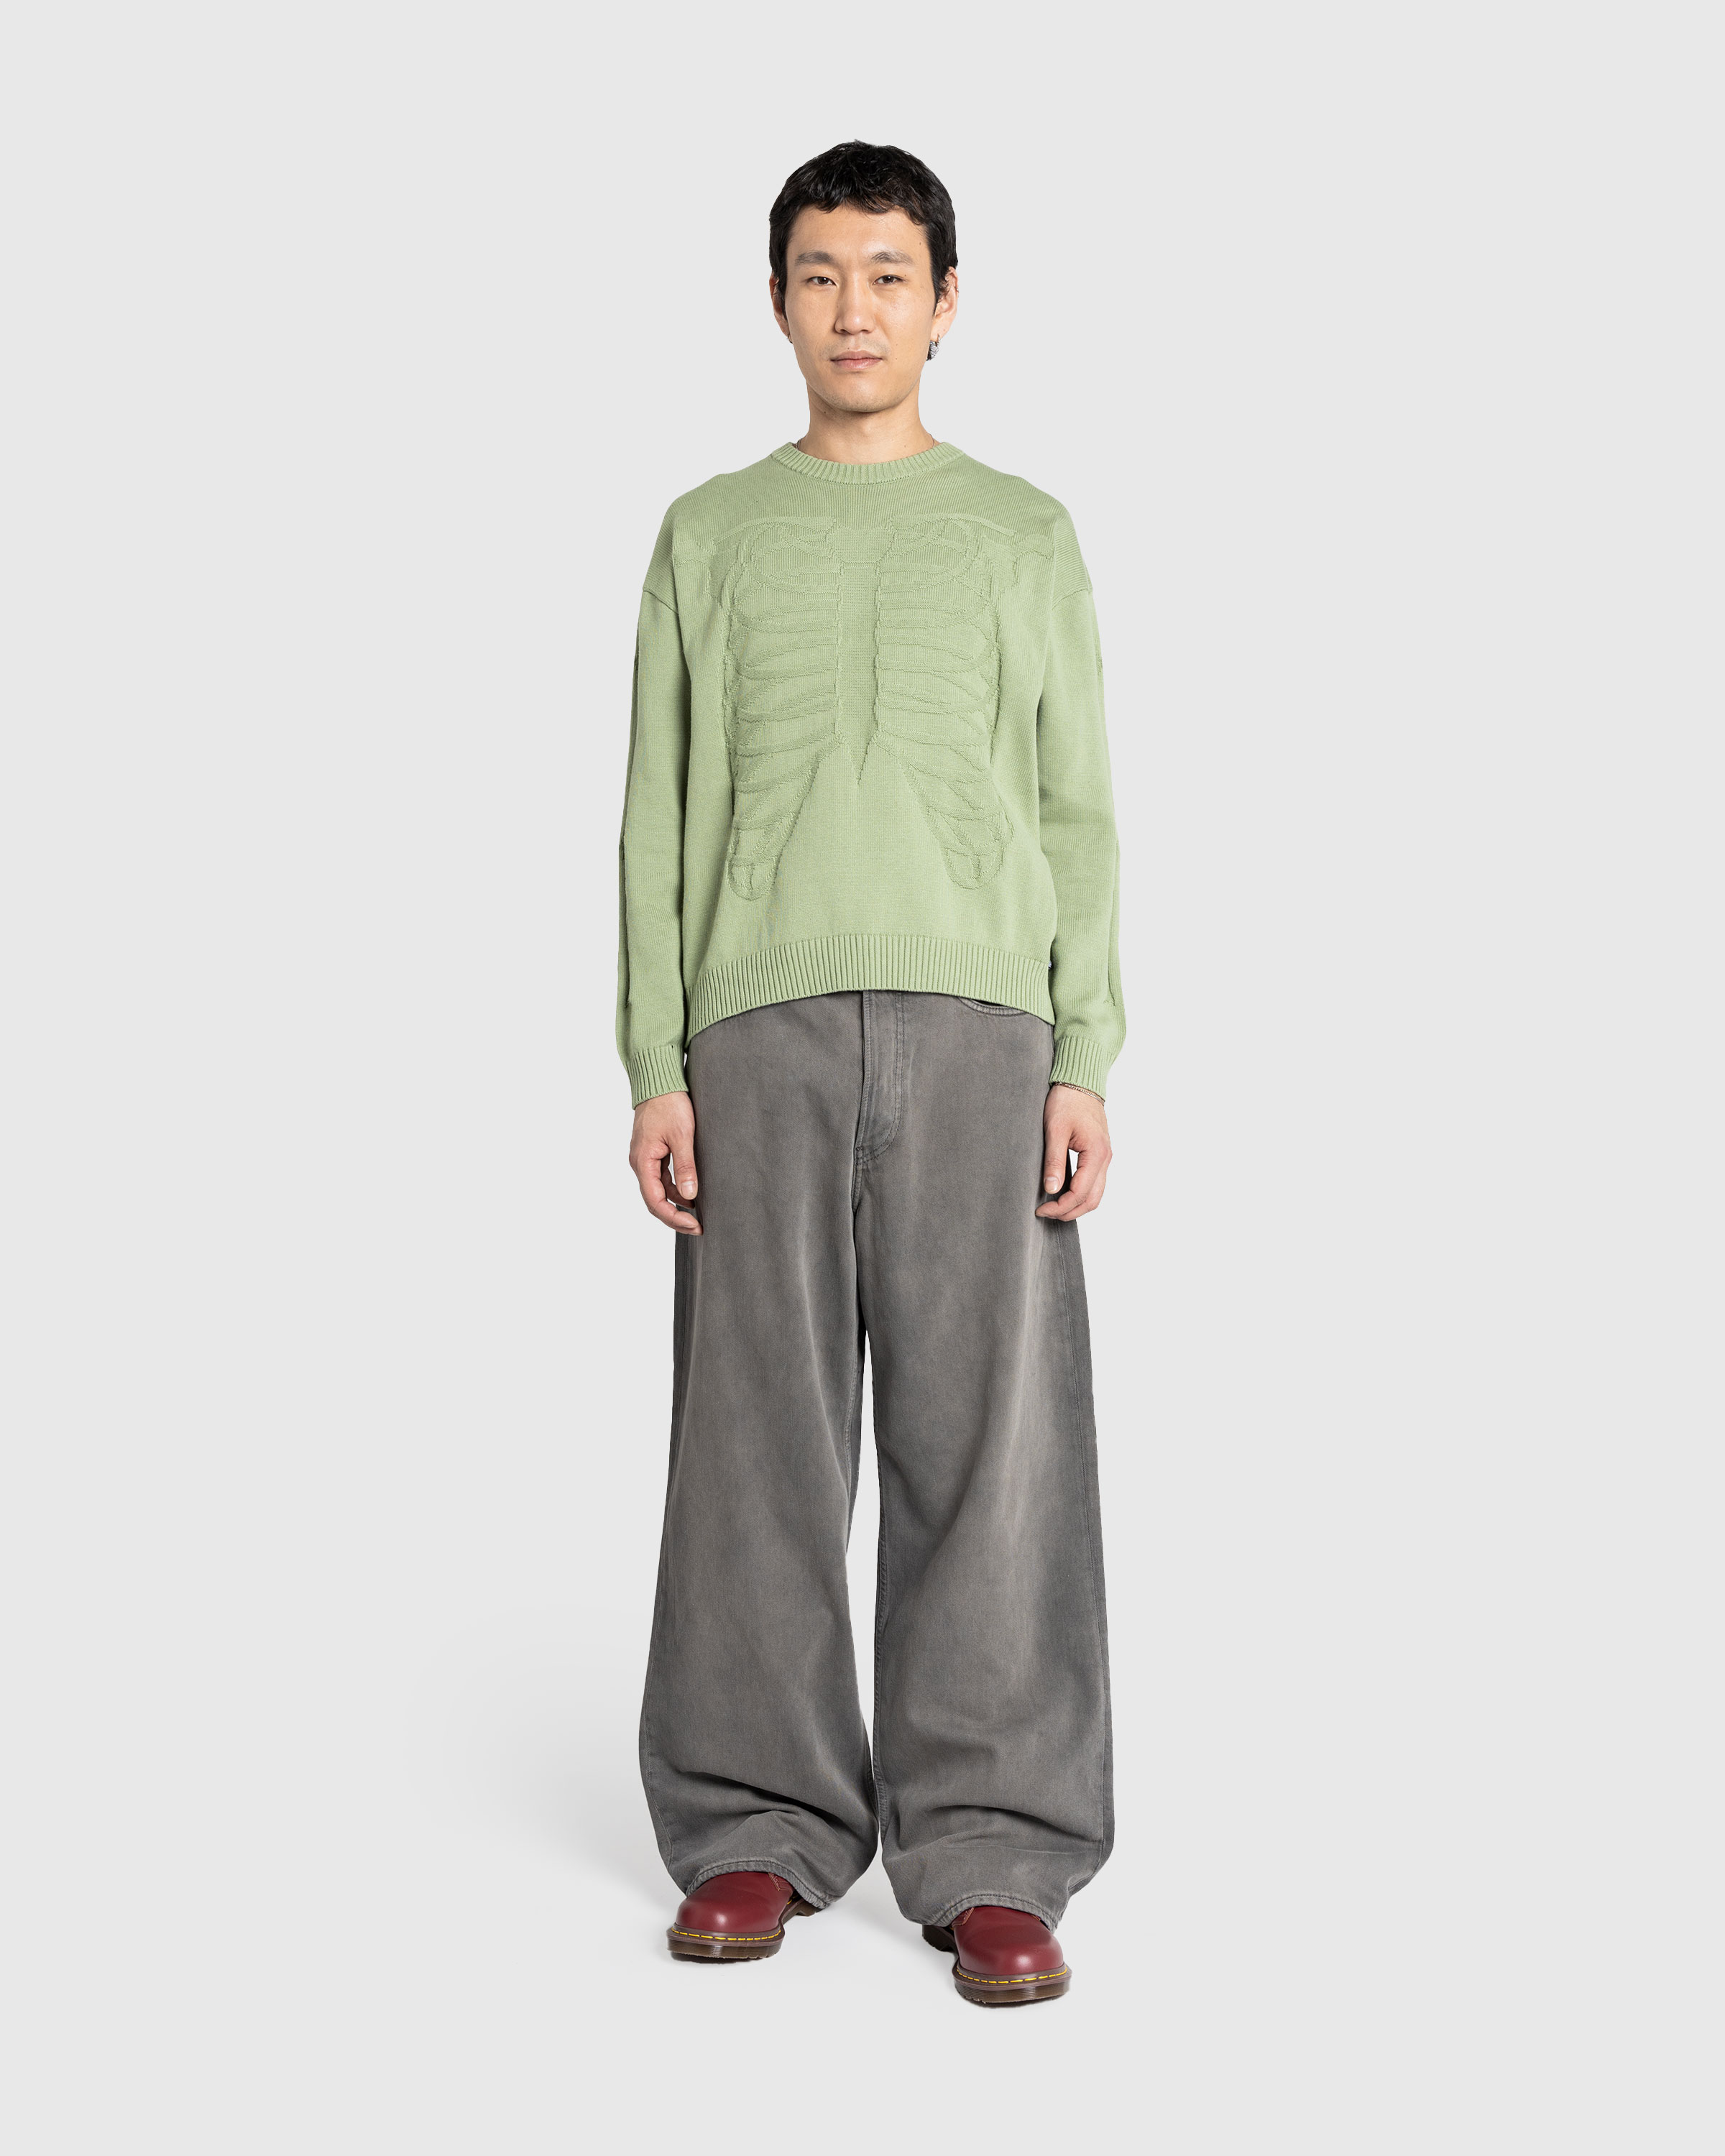 Acne Studios – Loose Fit Jeans 1981M Anthracite Grey - Pants - Grey - Image 3